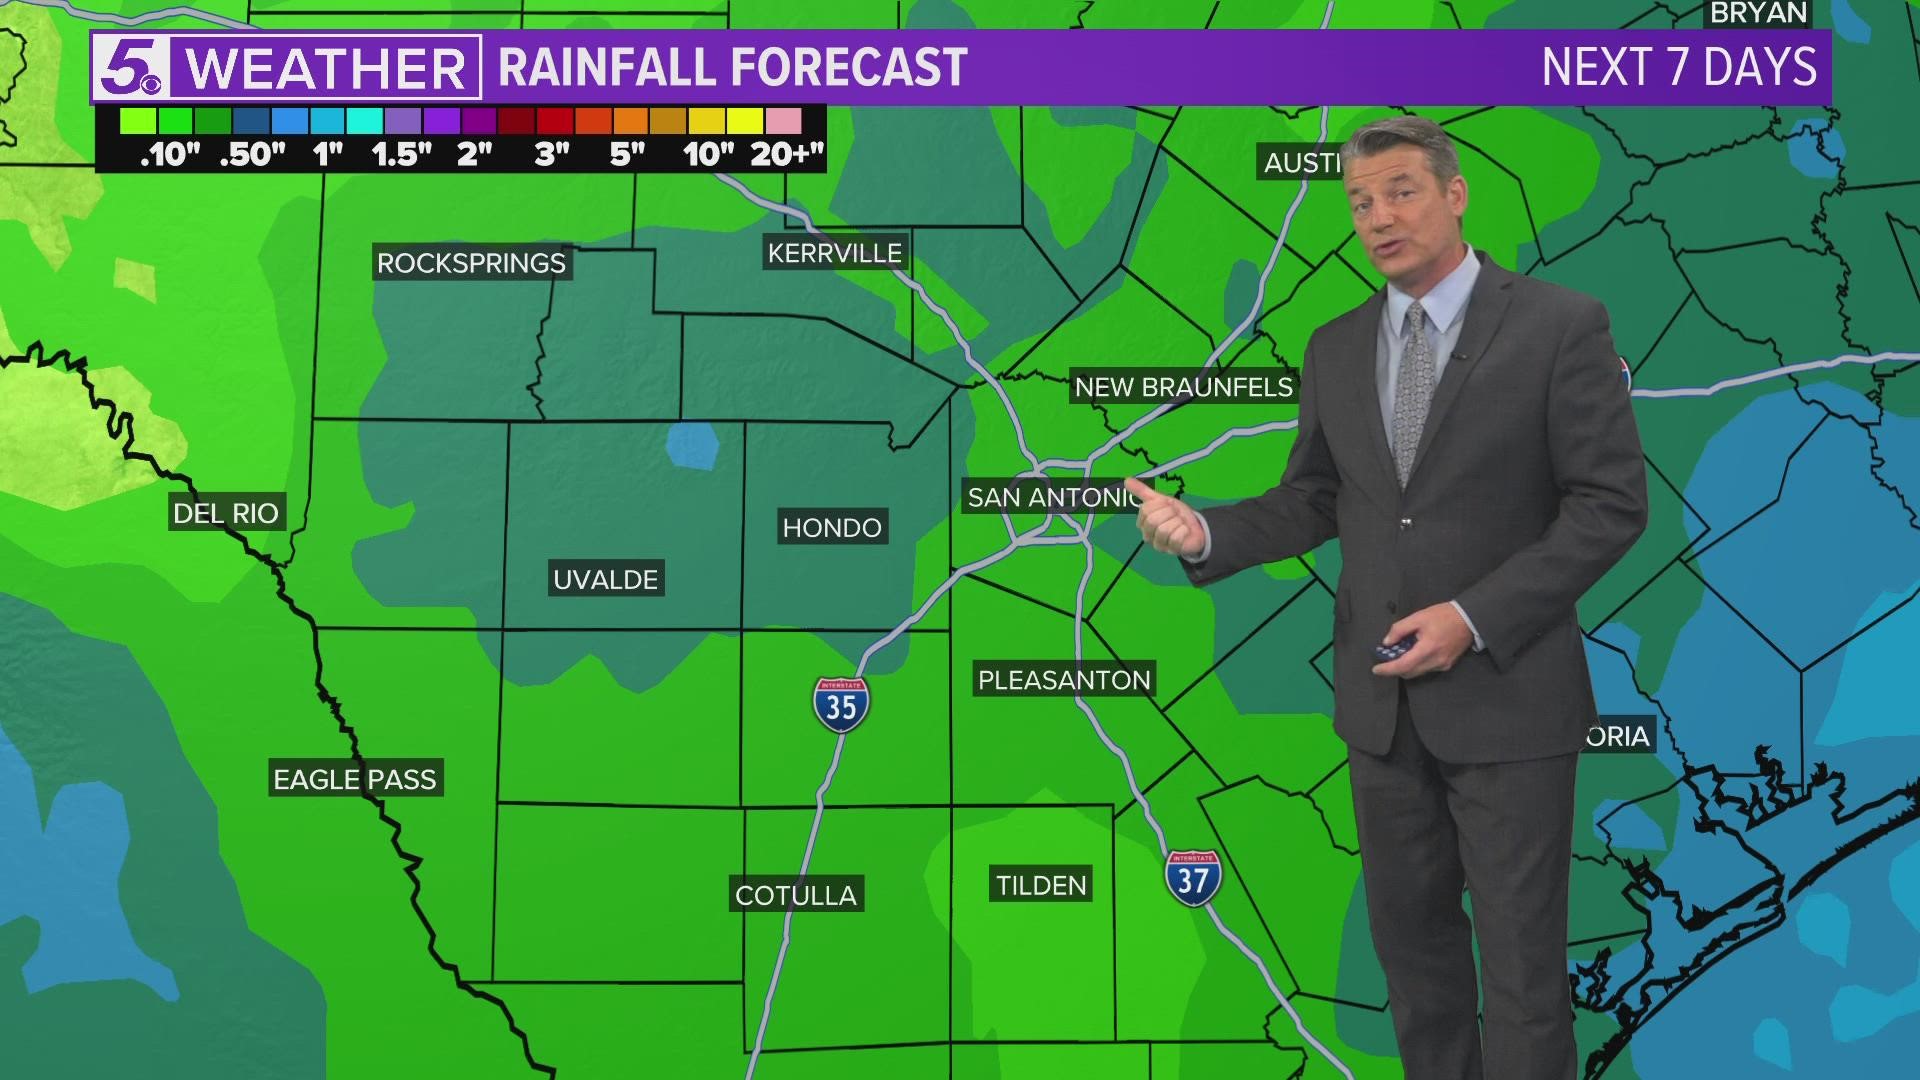 We’re expecting an upper level disturbance from north Texas to deliver .5-1.0” of rain Thursday and Friday.